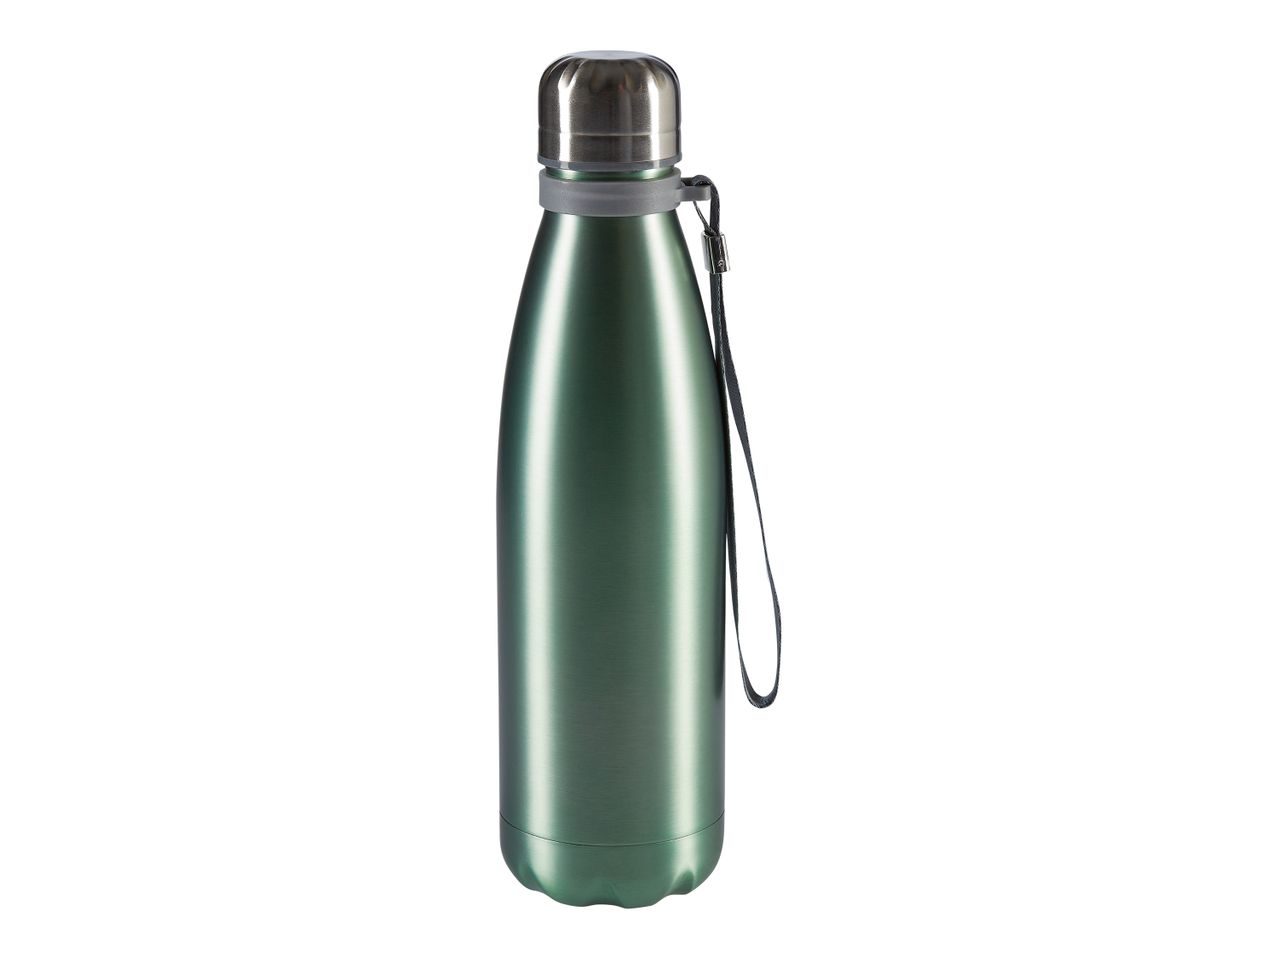 Go to full screen view: Stainless Steel Insulated Flask or Travel Mug - Image 3